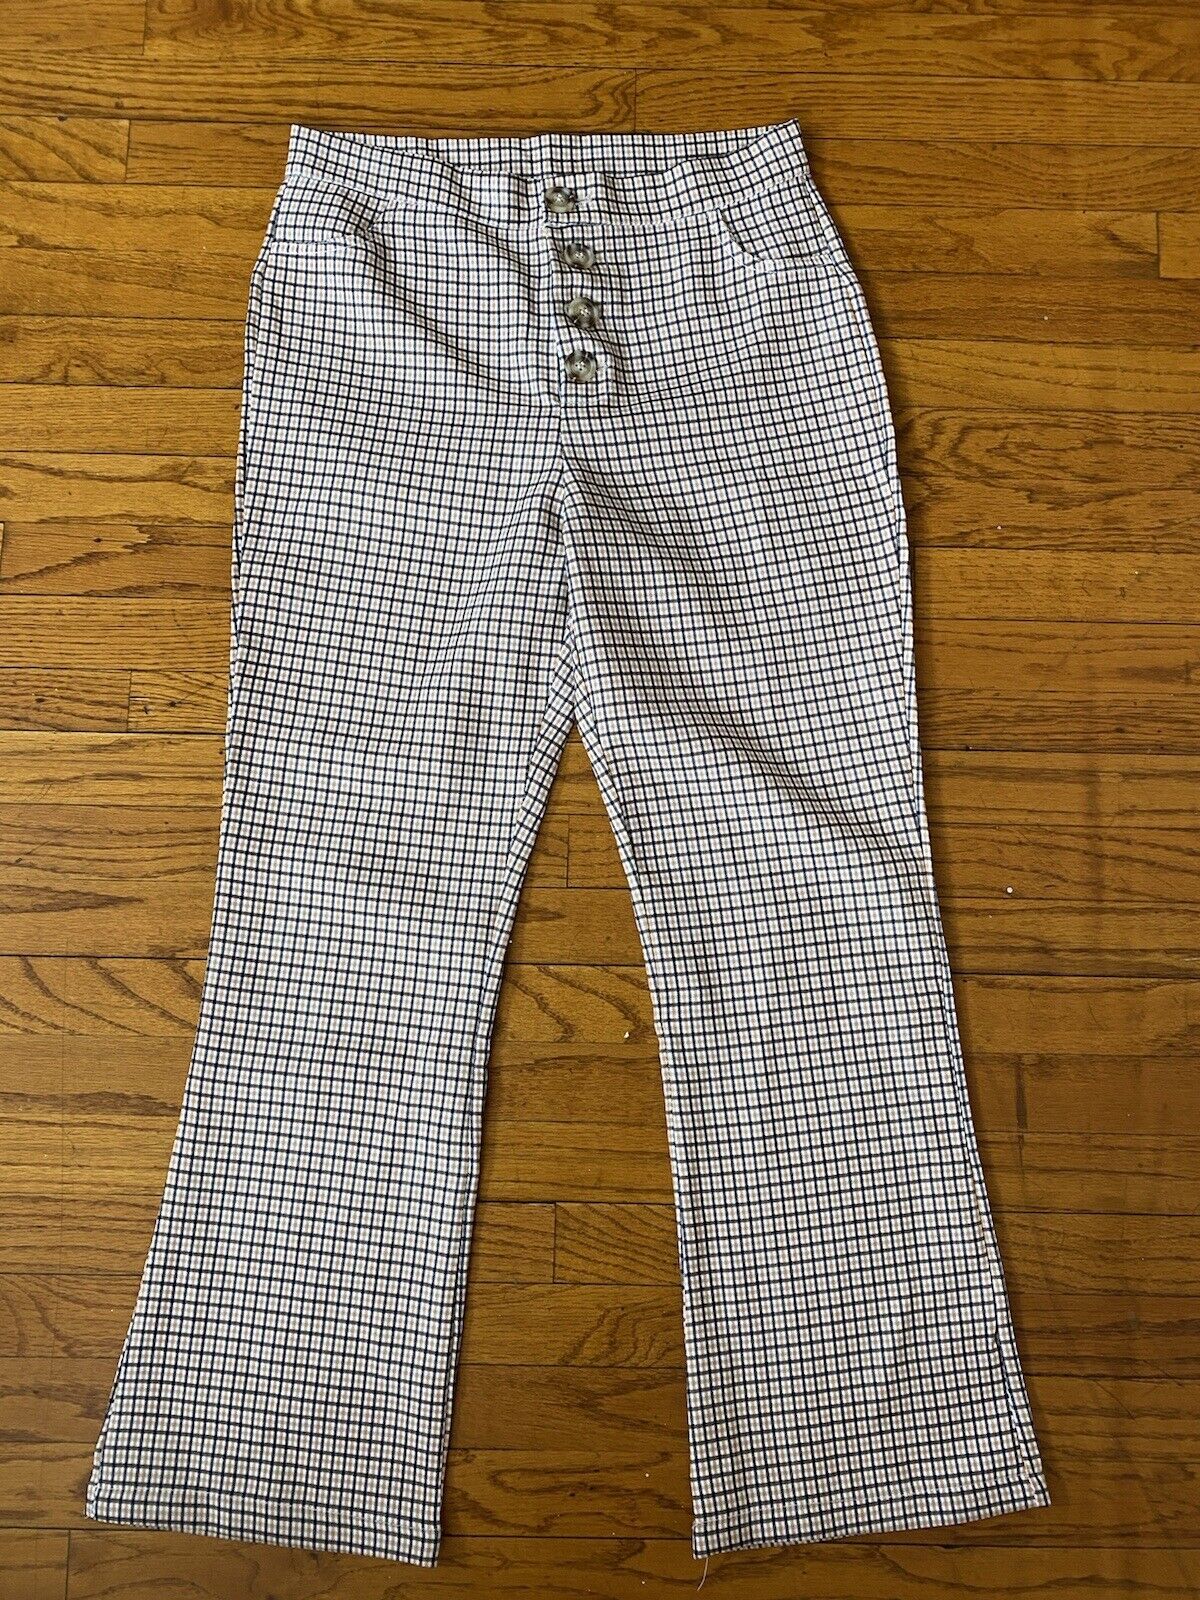 Gingham Pants - Unbranded - Women’s Small # 2585